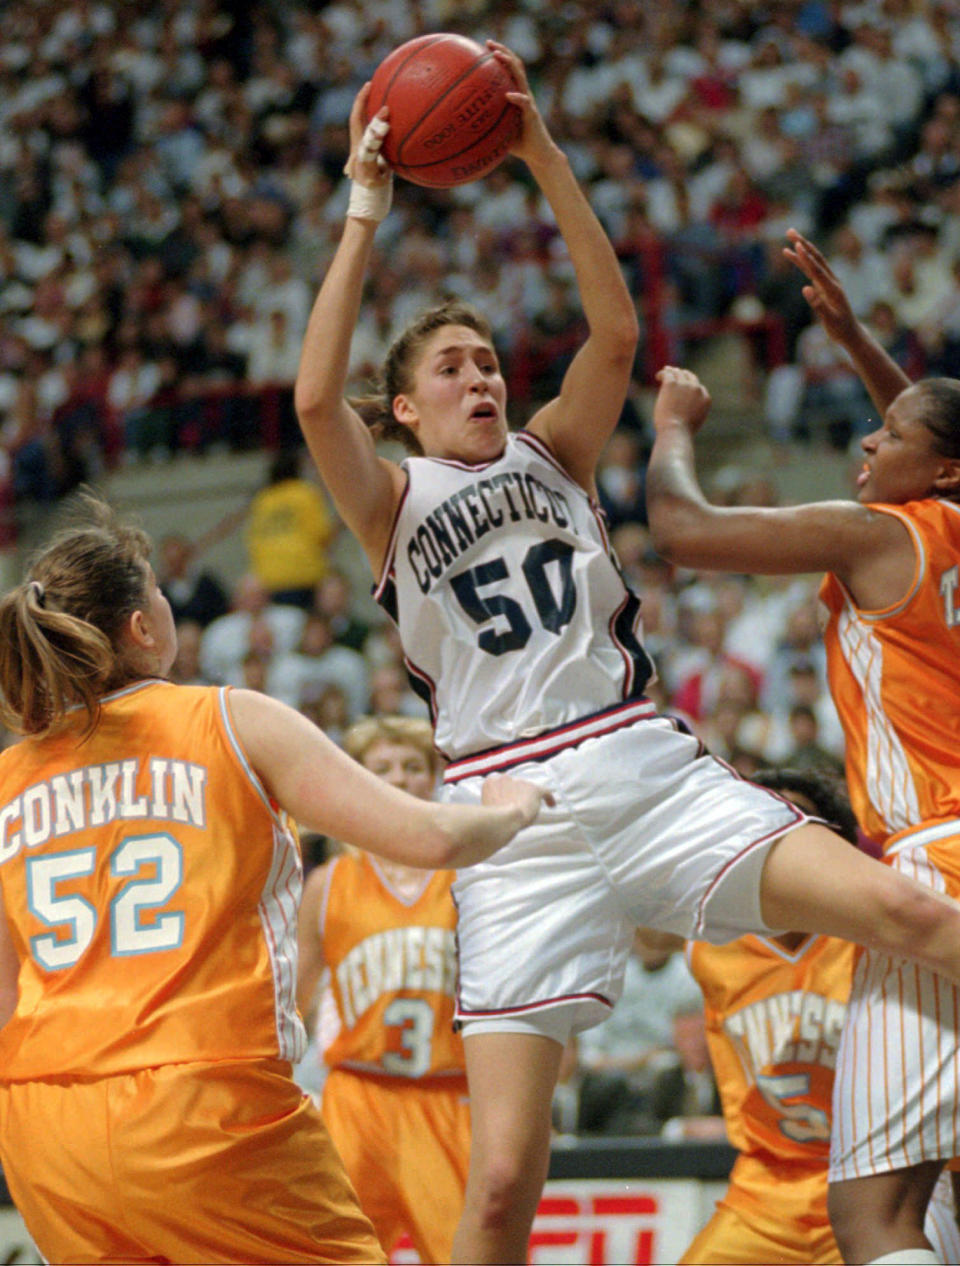 FILE - In this Jan. 16, 1995, file photo, Connecticut's Rebecca Lobo (50) pulls in a rebound as Tennessee's Abby Conklin (52) and Tiffani Johnson, right, defend during the first half of an NCAA college basketball game in Storrs, Conn., Monday, Jan. 16, 1995. Lobo is among the 14 finalists unveiled Saturday, Feb. 18, 2017, for this year's Basketball Hall of Fame induction class. (AP Photo/Bob Child, File)